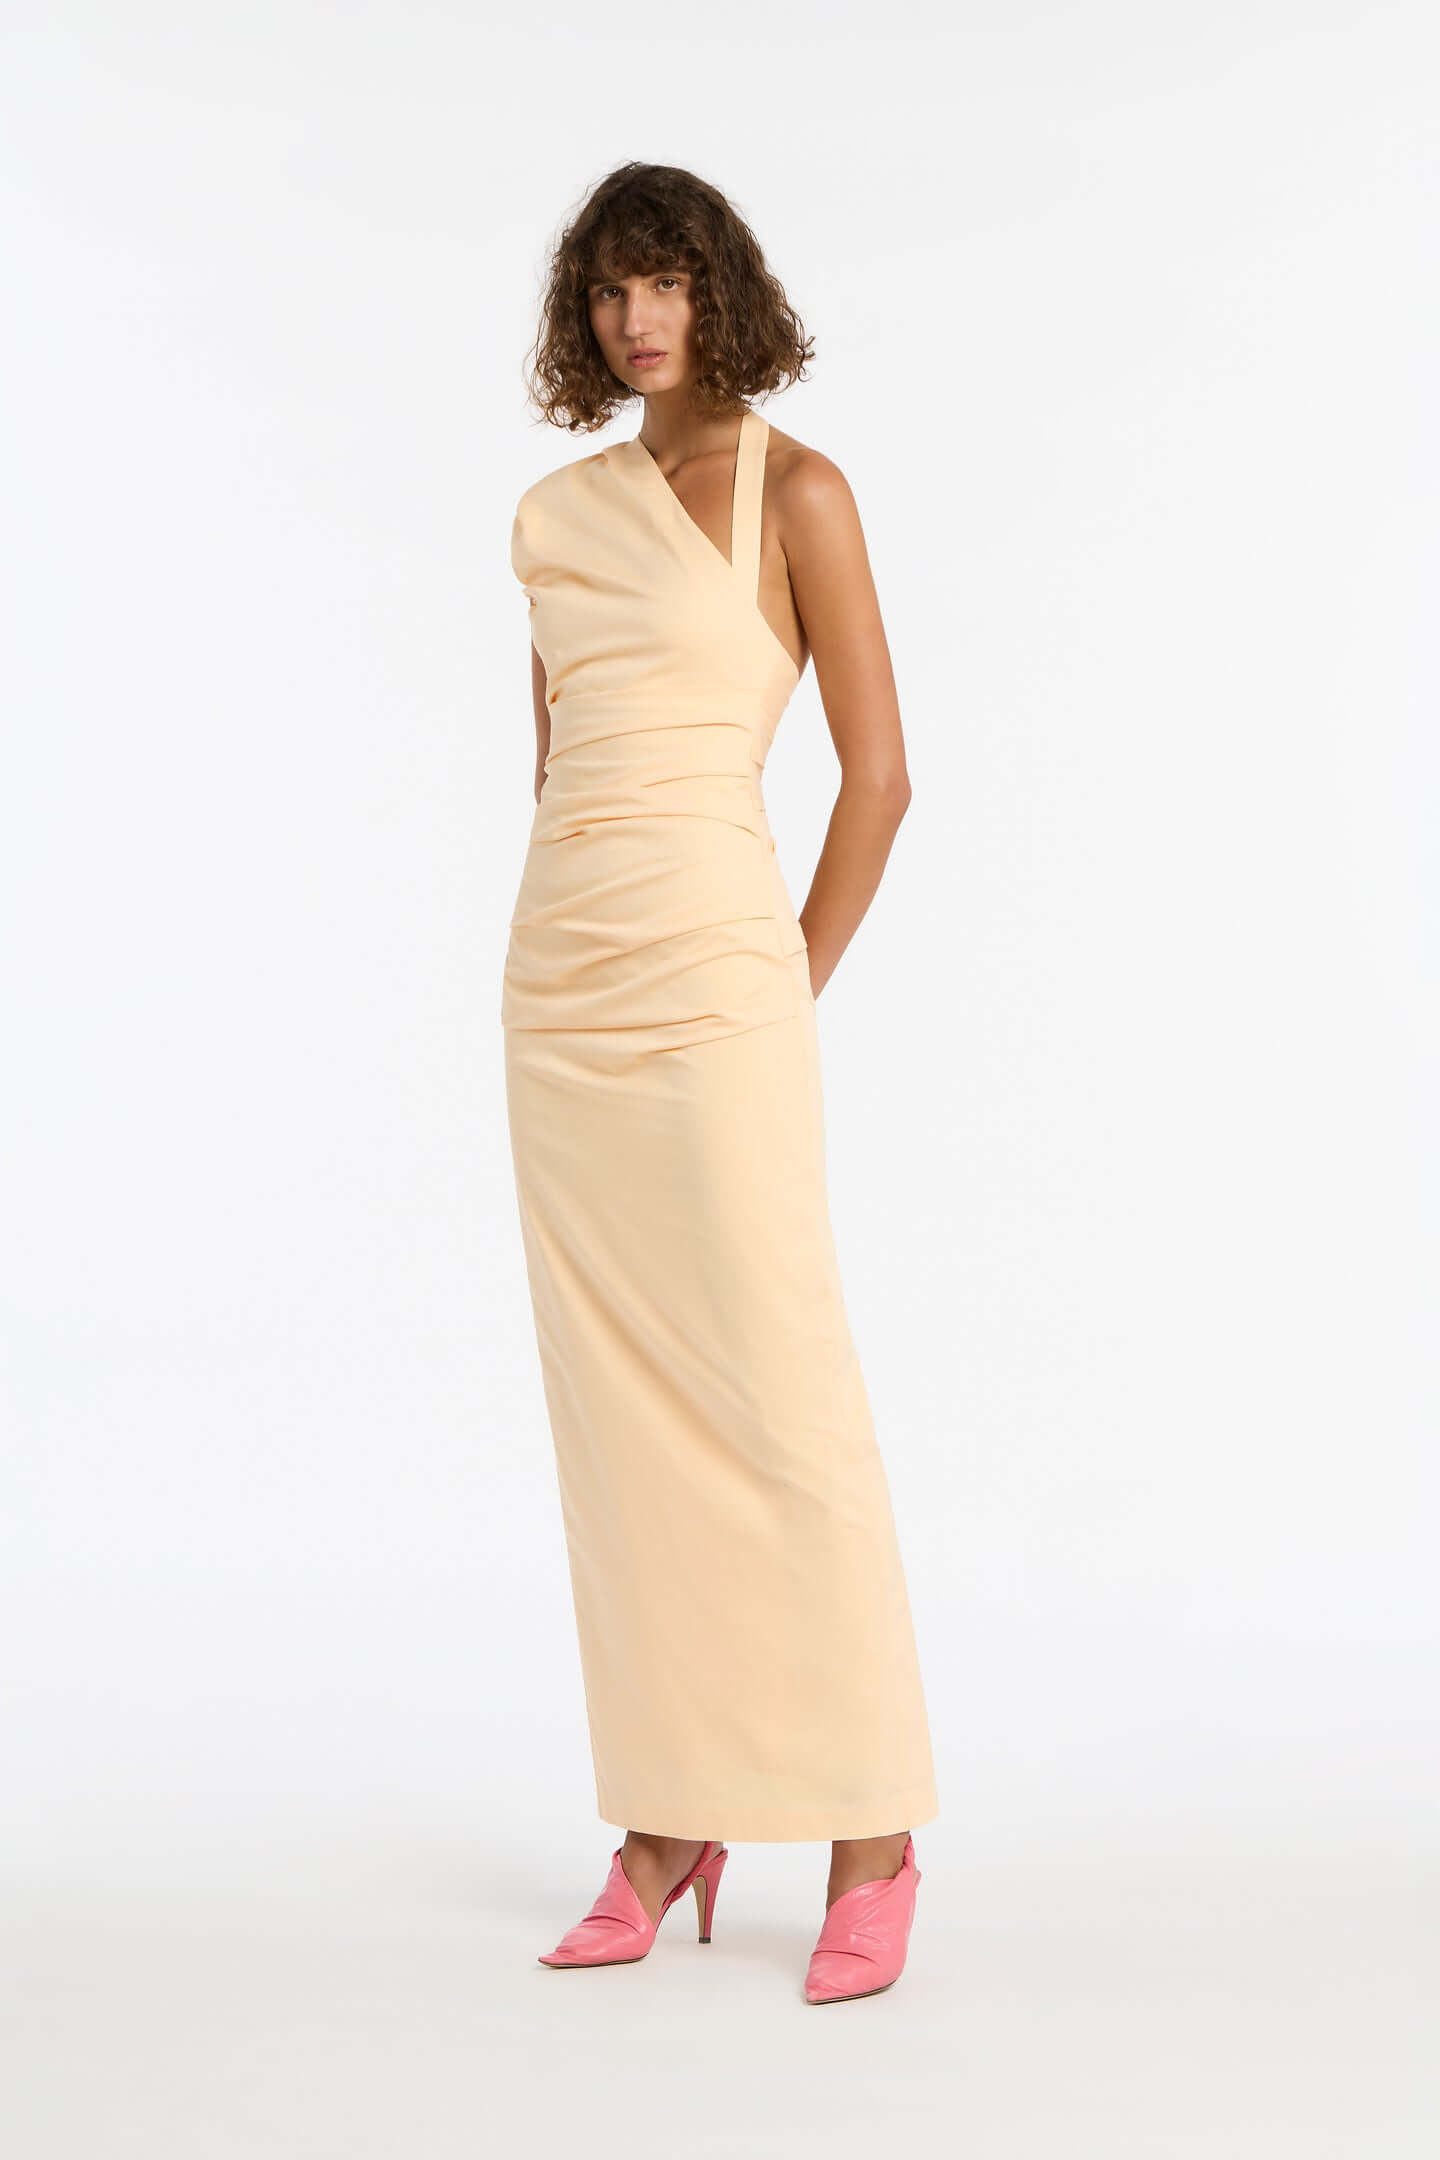 SIR Giacomo Gathered Gown in Butter available at TNT The New Trend Australia. Free shipping on orders over $300 AUD.